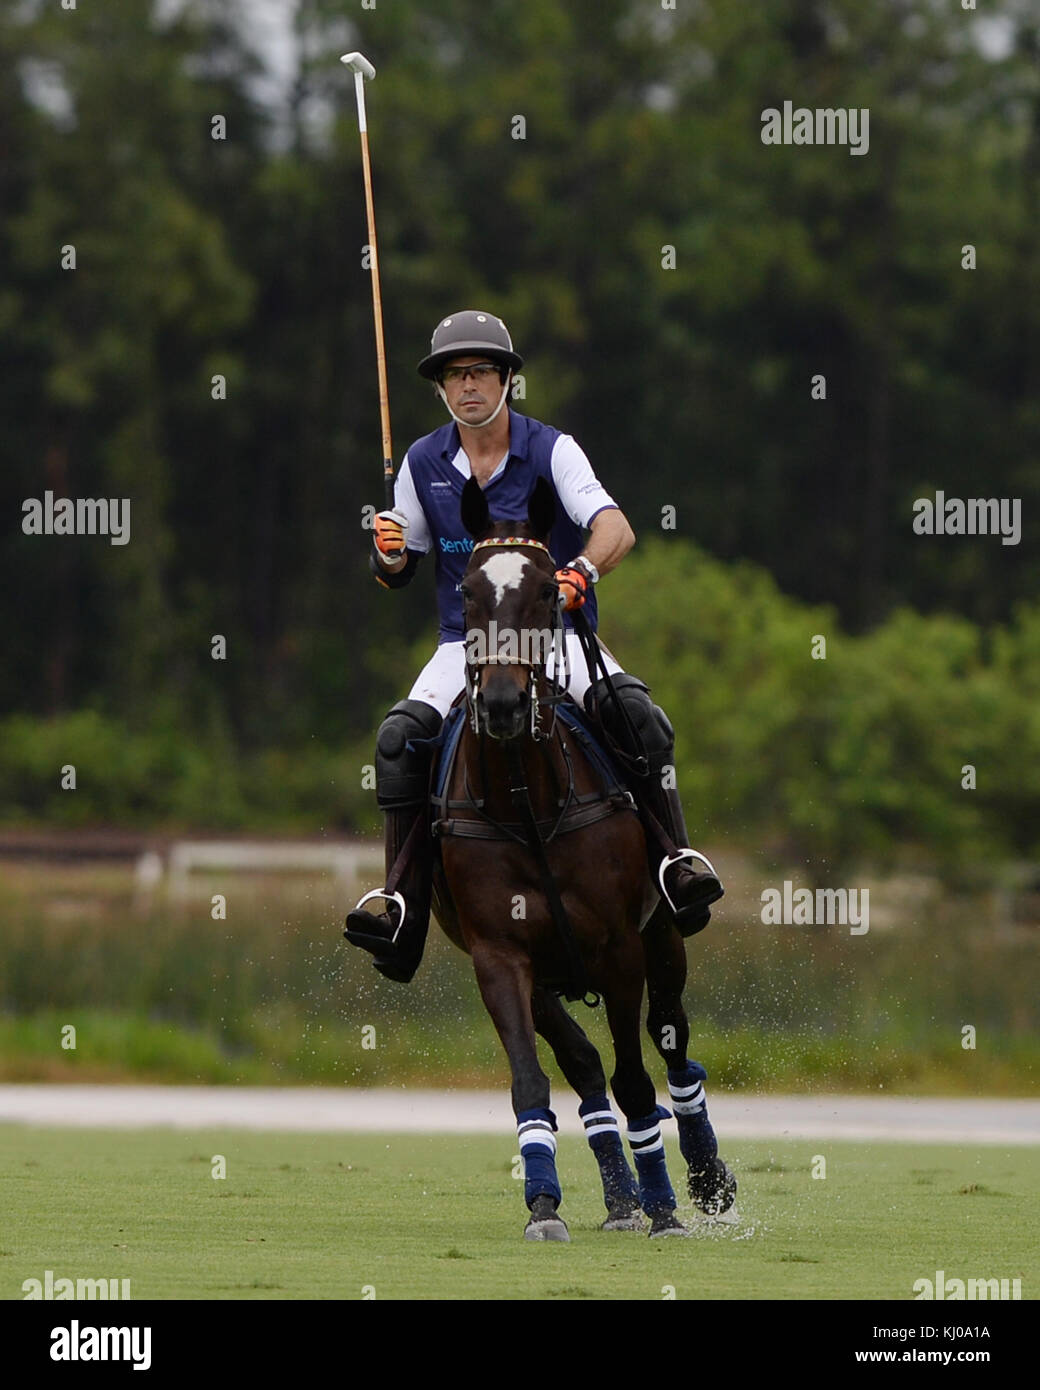 WELLINGTON, FL - MAY 04: Nacho Figueras participates in the Sentebale Polo Cup Presented By Royal Salute World Polo and held at Valiente Polo Farm In Wellington Florida on May 4, 2016 in Wellington, Florida.  People:  Nacho Figueras Stock Photo